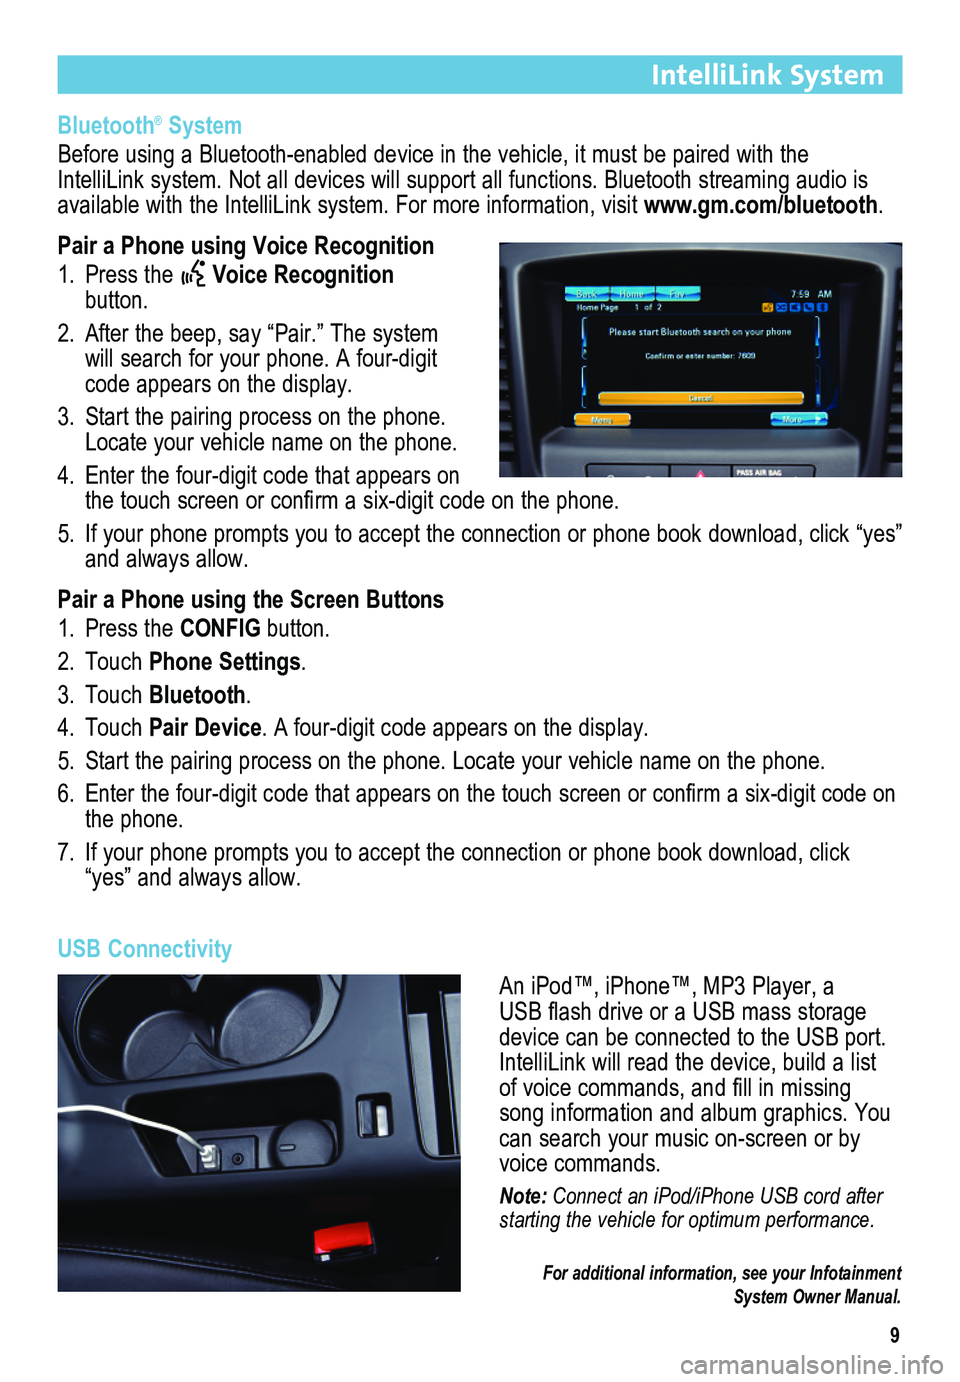 BUICK REGAL 2013  Get To Know Guide 9
IntelliLink System
Bluetooth® System
Before using a Bluetooth-enabled device in the vehicle, it must be paired with the  IntelliLink system. Not all devices will support all functions. Bluetooth st